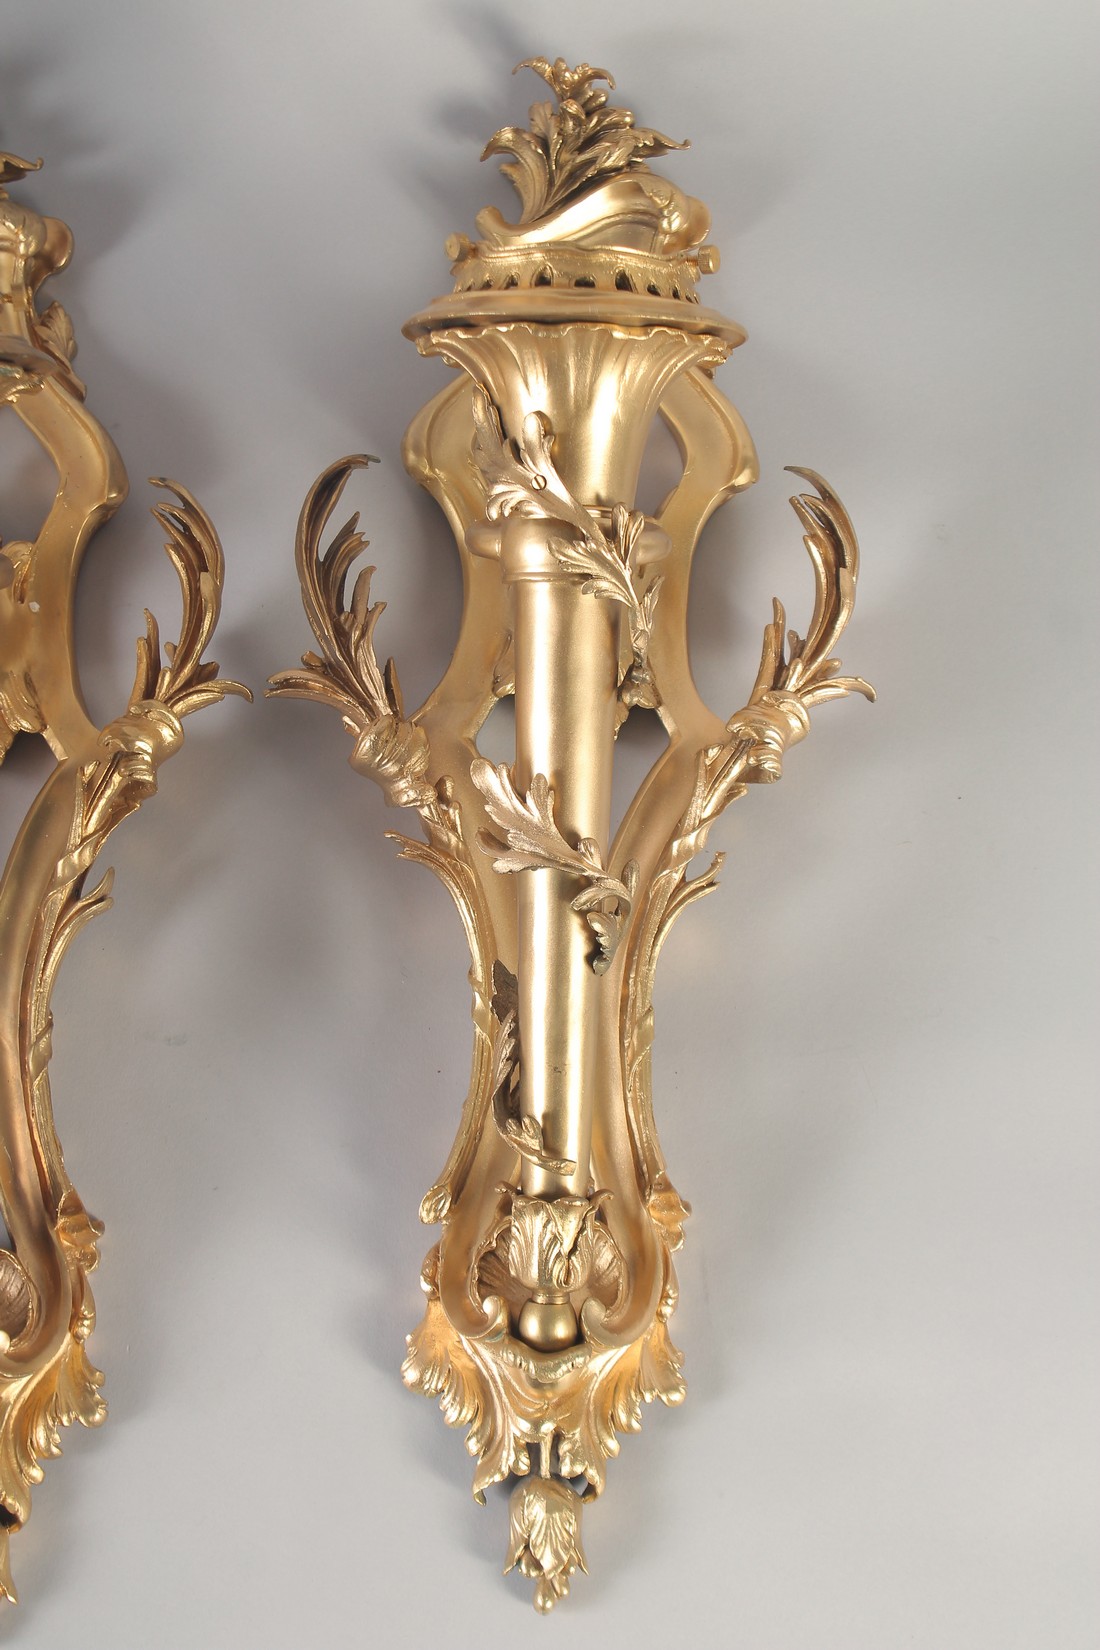 A VERY GOOD PAIR OF GILT BRONZE WALL CORNETS with acanthus scrolls and torch. 24ins long. - Image 3 of 3